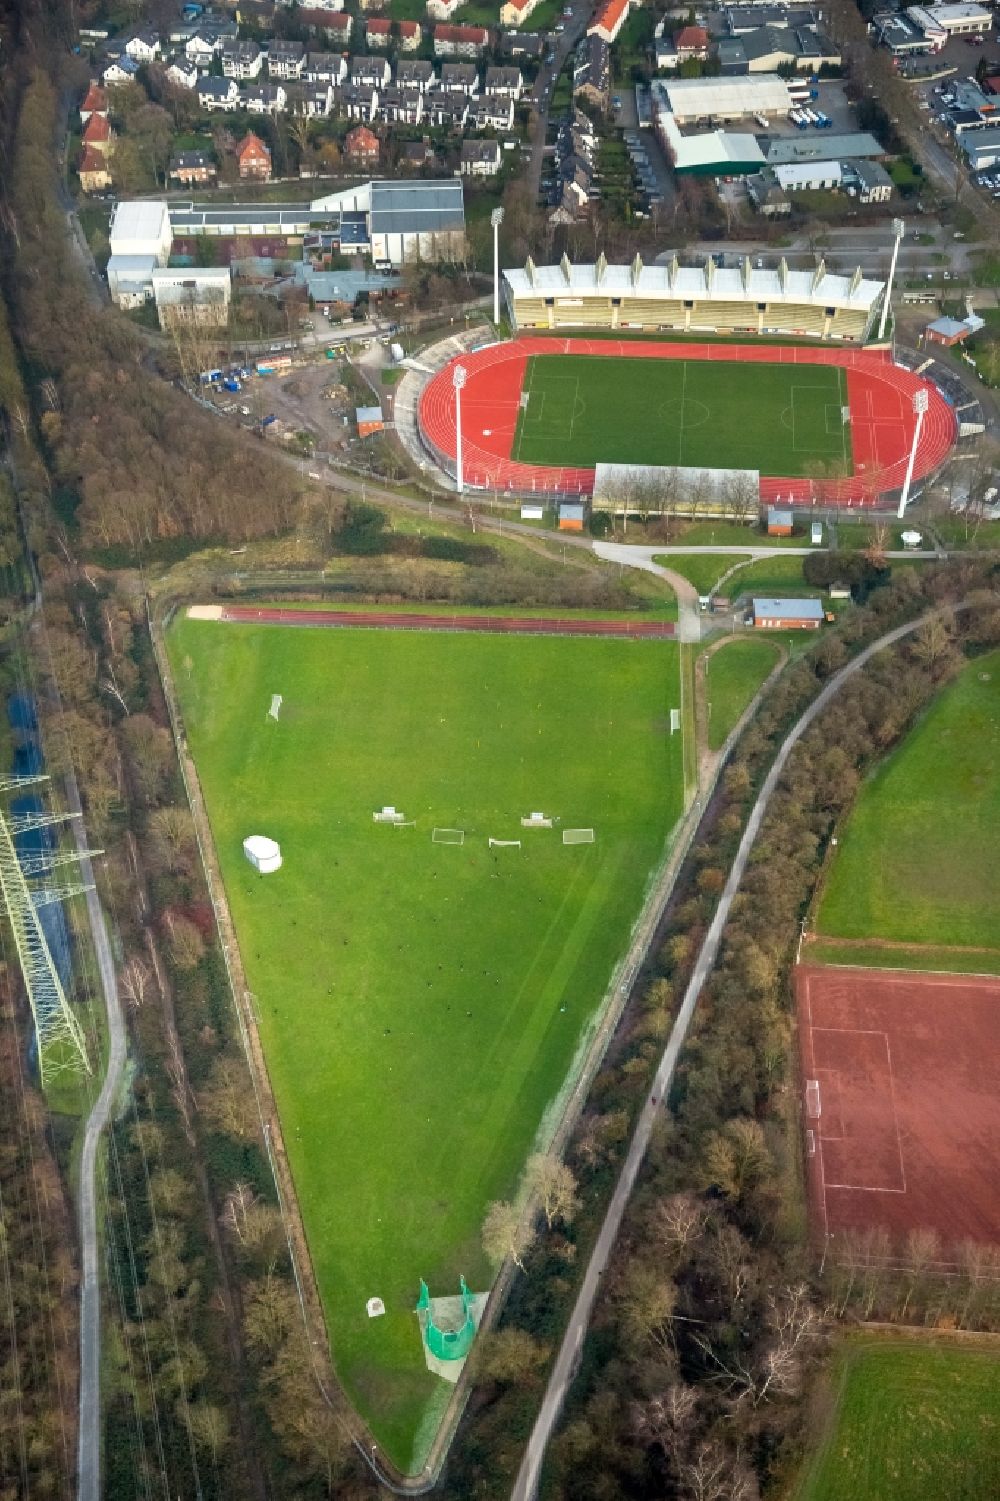 Bochum from above - Olympic base with sports halls and boarding school at Lohrheidestadion located in Bochum Wattenscheid district in North Rhine-Westphalia